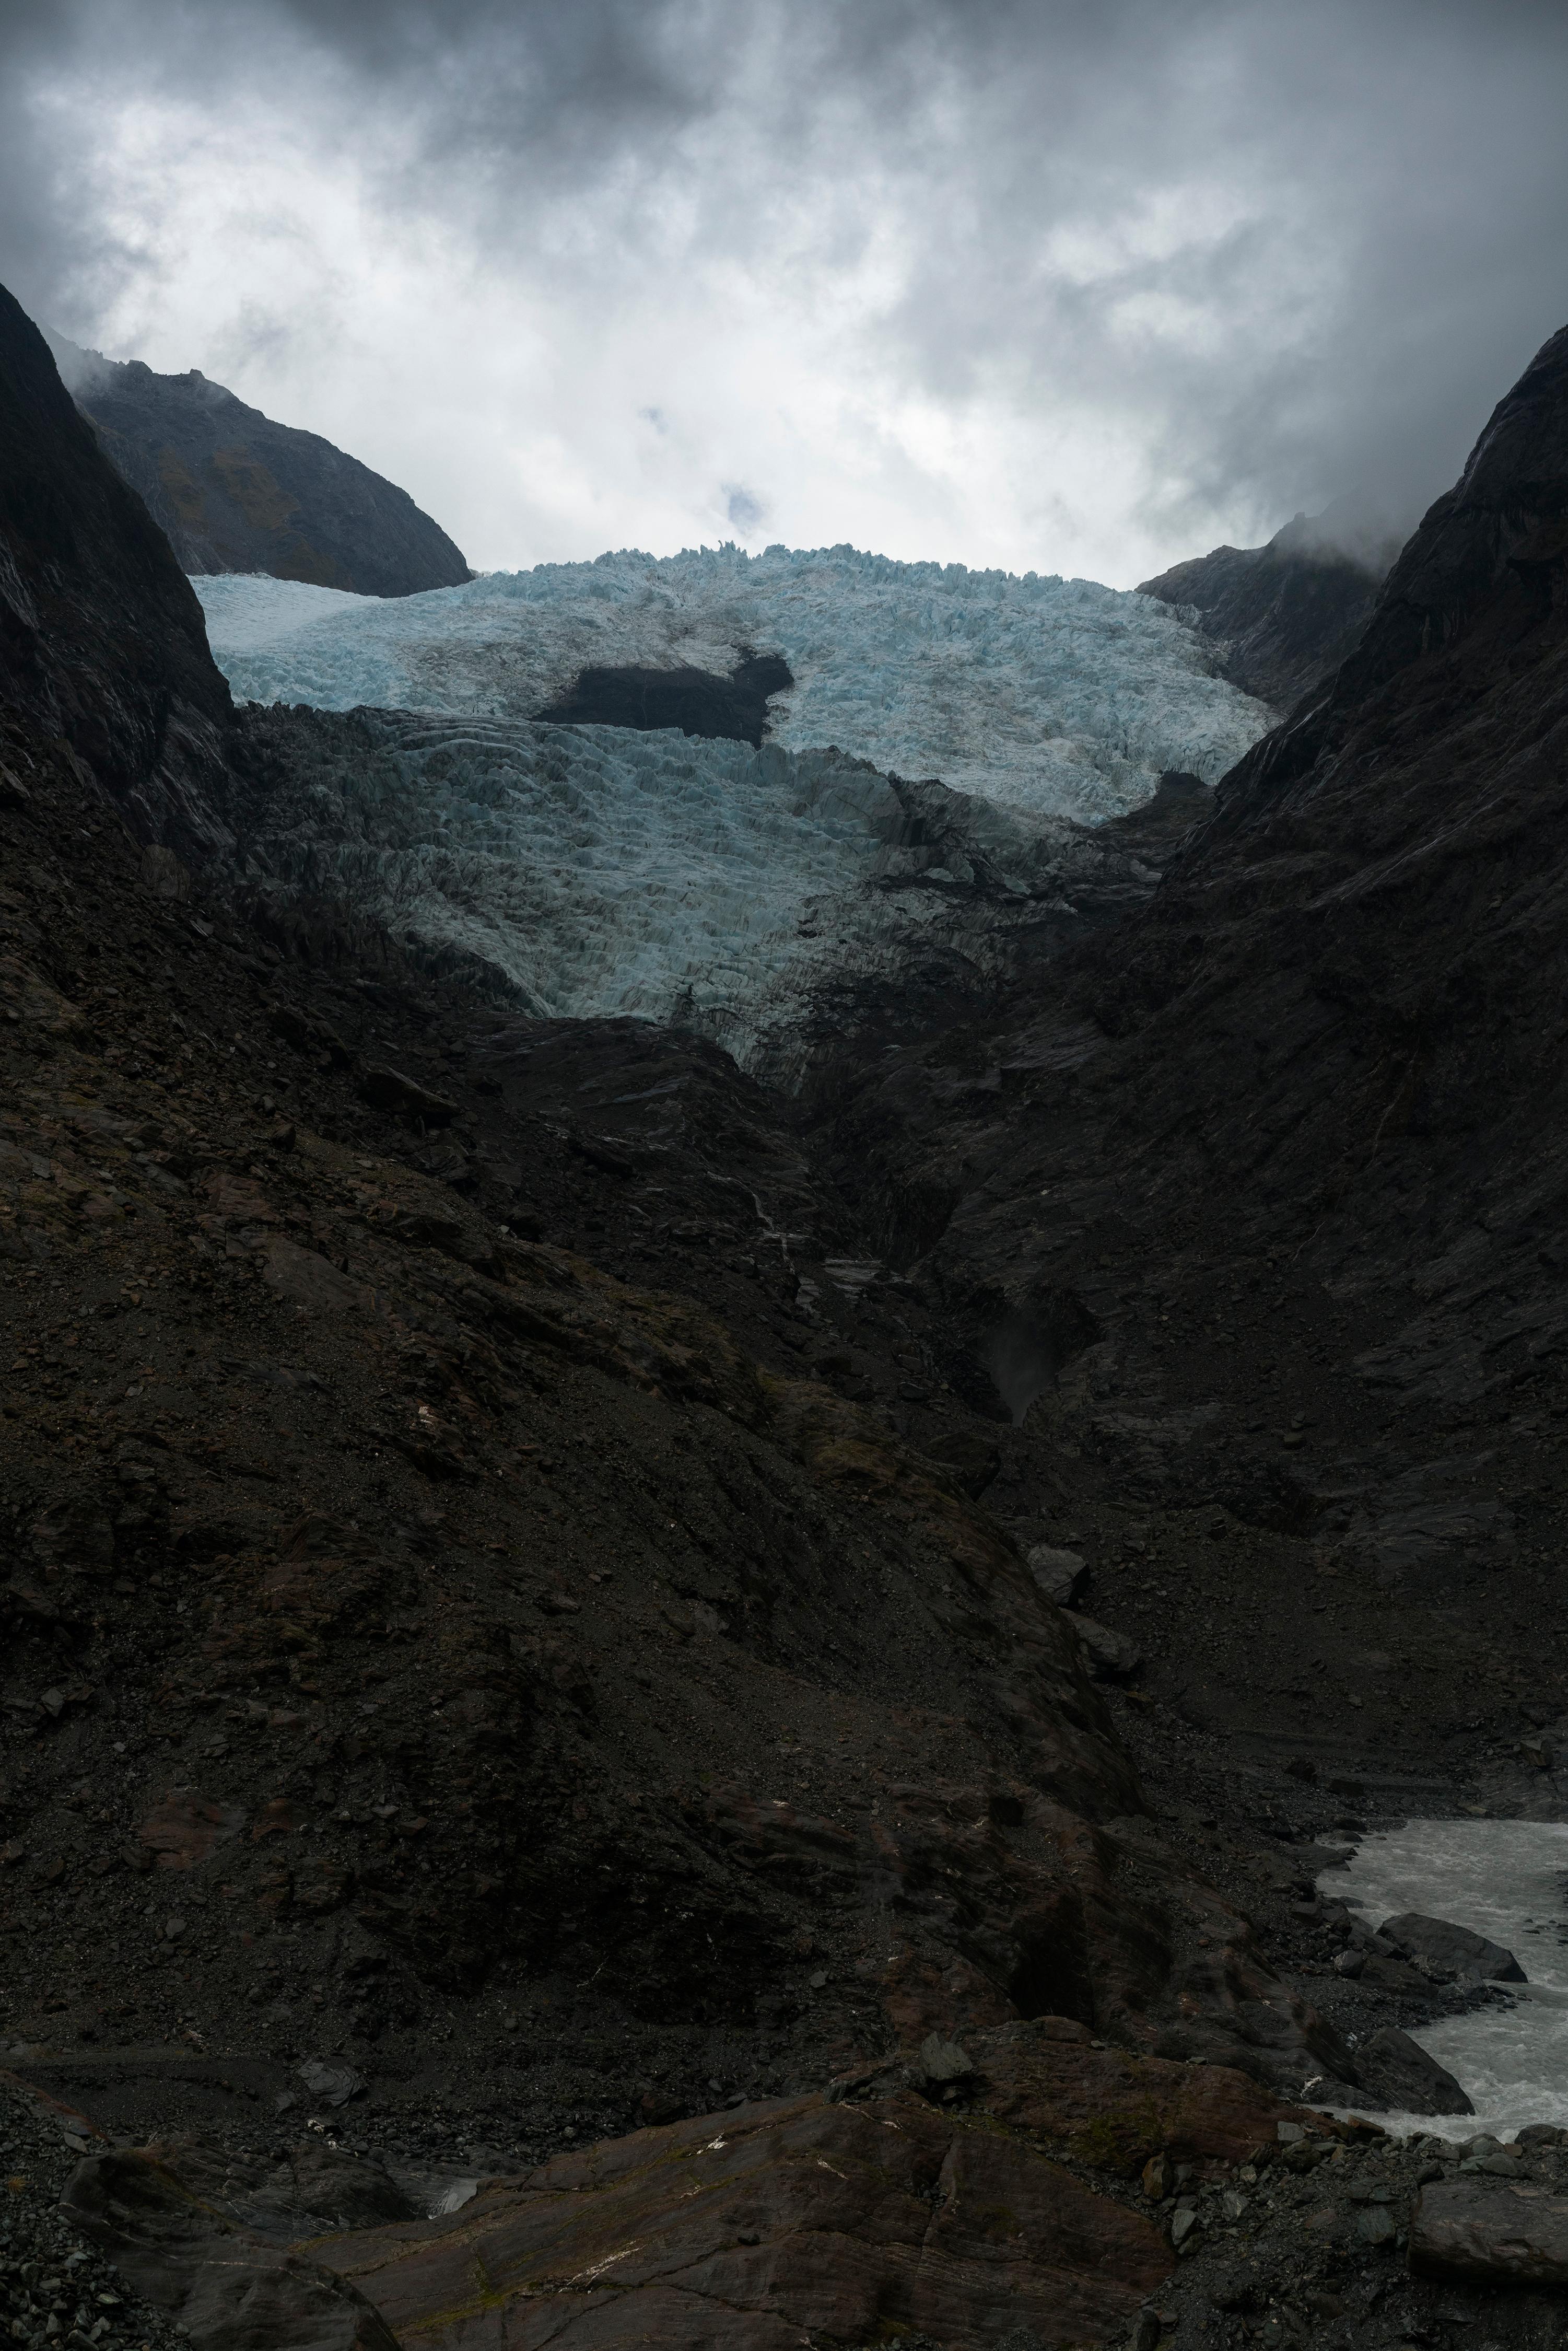 Jem Southam Color Photograph - Clearing Rain, The Franz Josef Glacier, New Zealand - Contemporary Photography